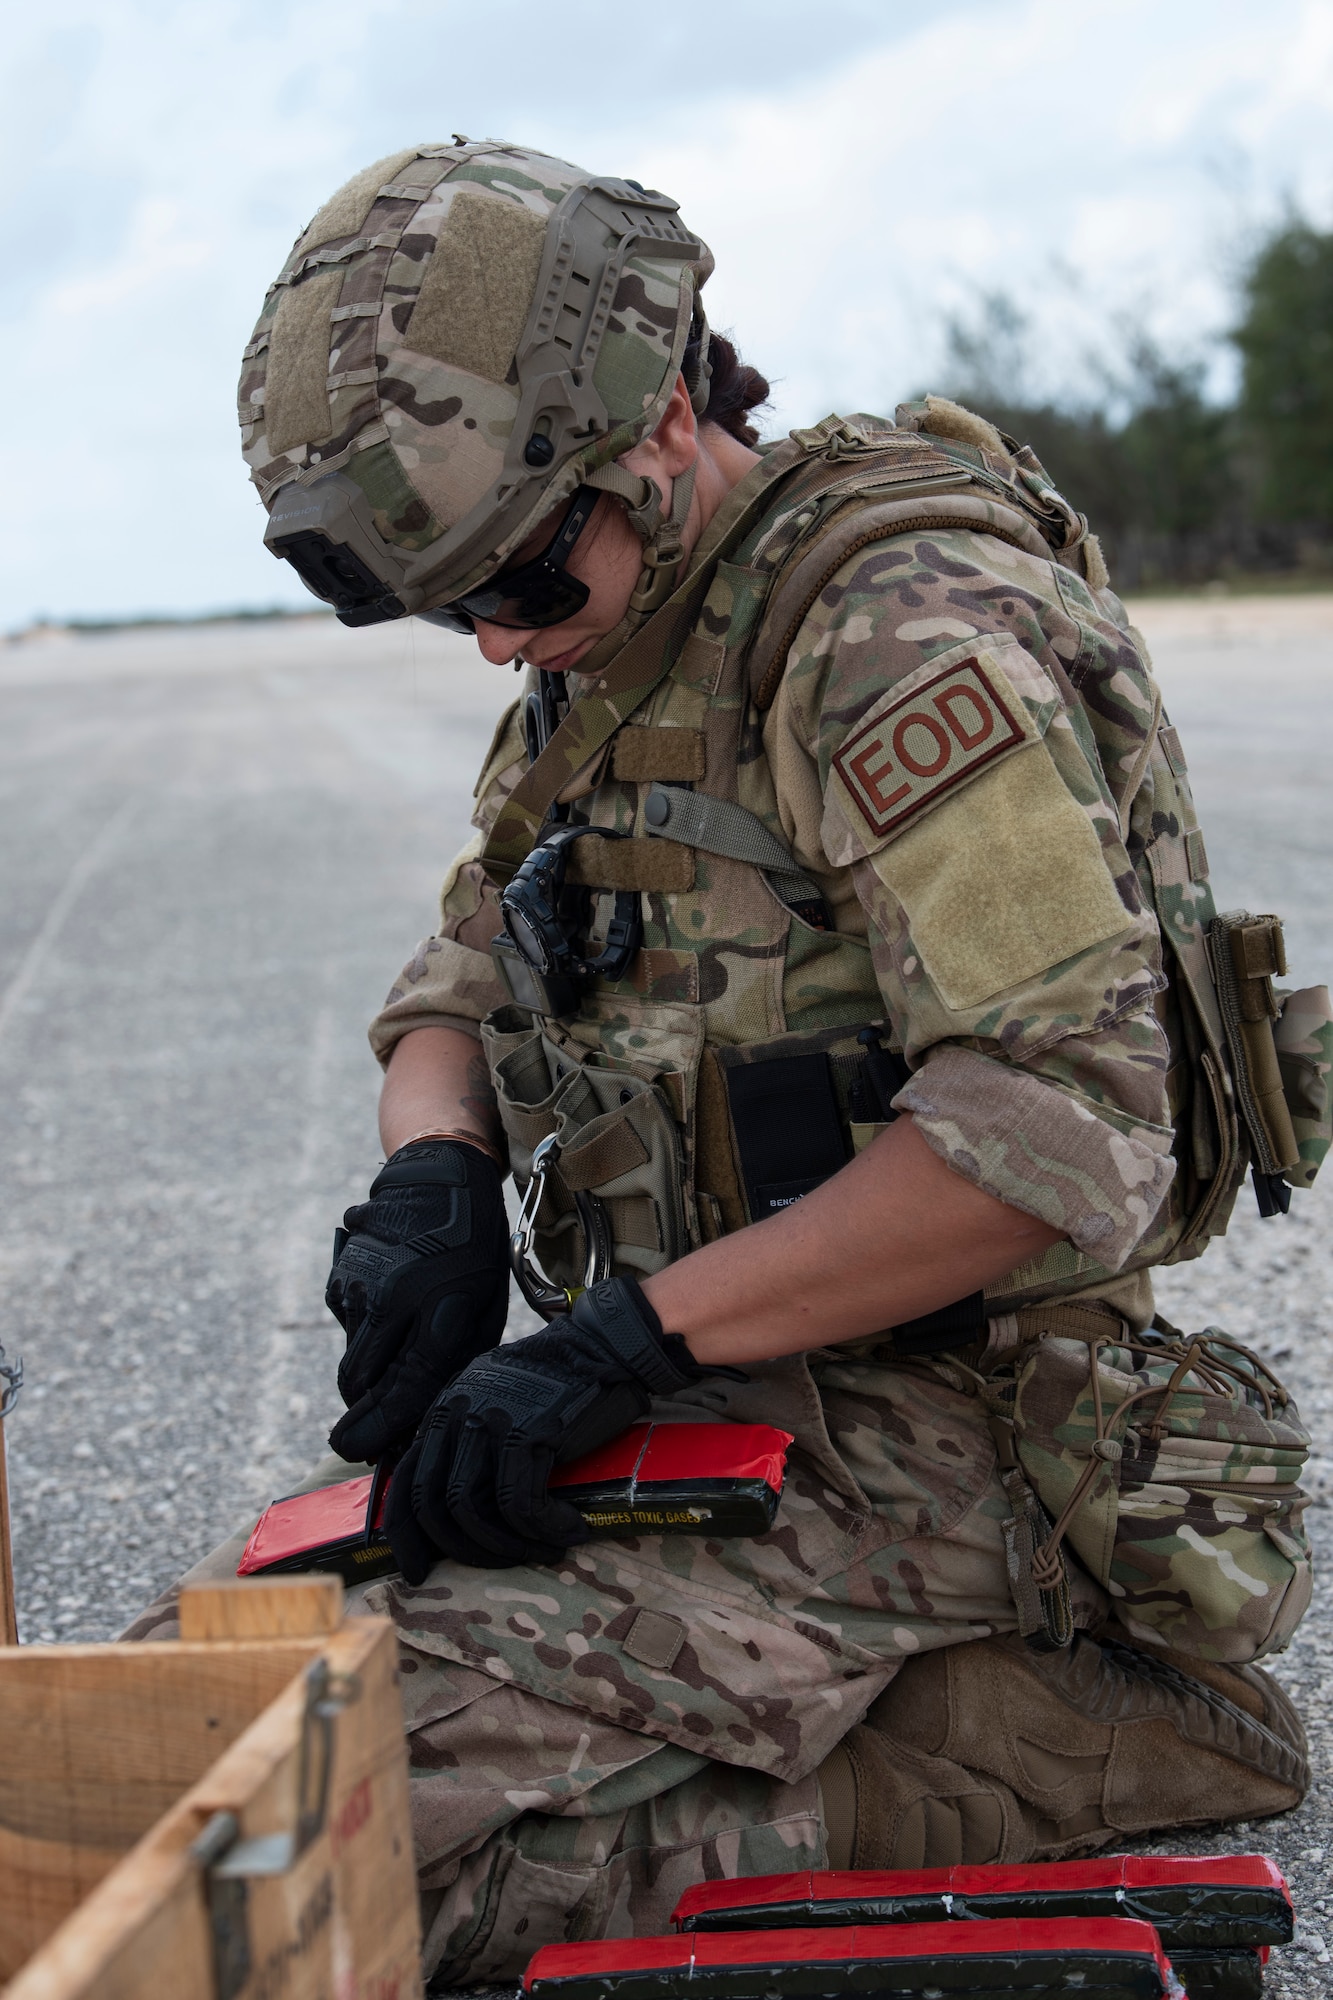 An Explosive Ordnance Disposal technician with the 36th Civil Engineer Squadron prepares her equipment during a Rapid Airfield Damage Repair (RADR) Exercise at Andersen Air Force Base, Feb. 12, 2020. The RADR Training was conducted as a part of Cope North 2020, an annual U.S. Pacific Air Forces joint/combined, trilateral field training exercise. (U.S. Air Force photo by Airman 1st Class Amir R. Young)